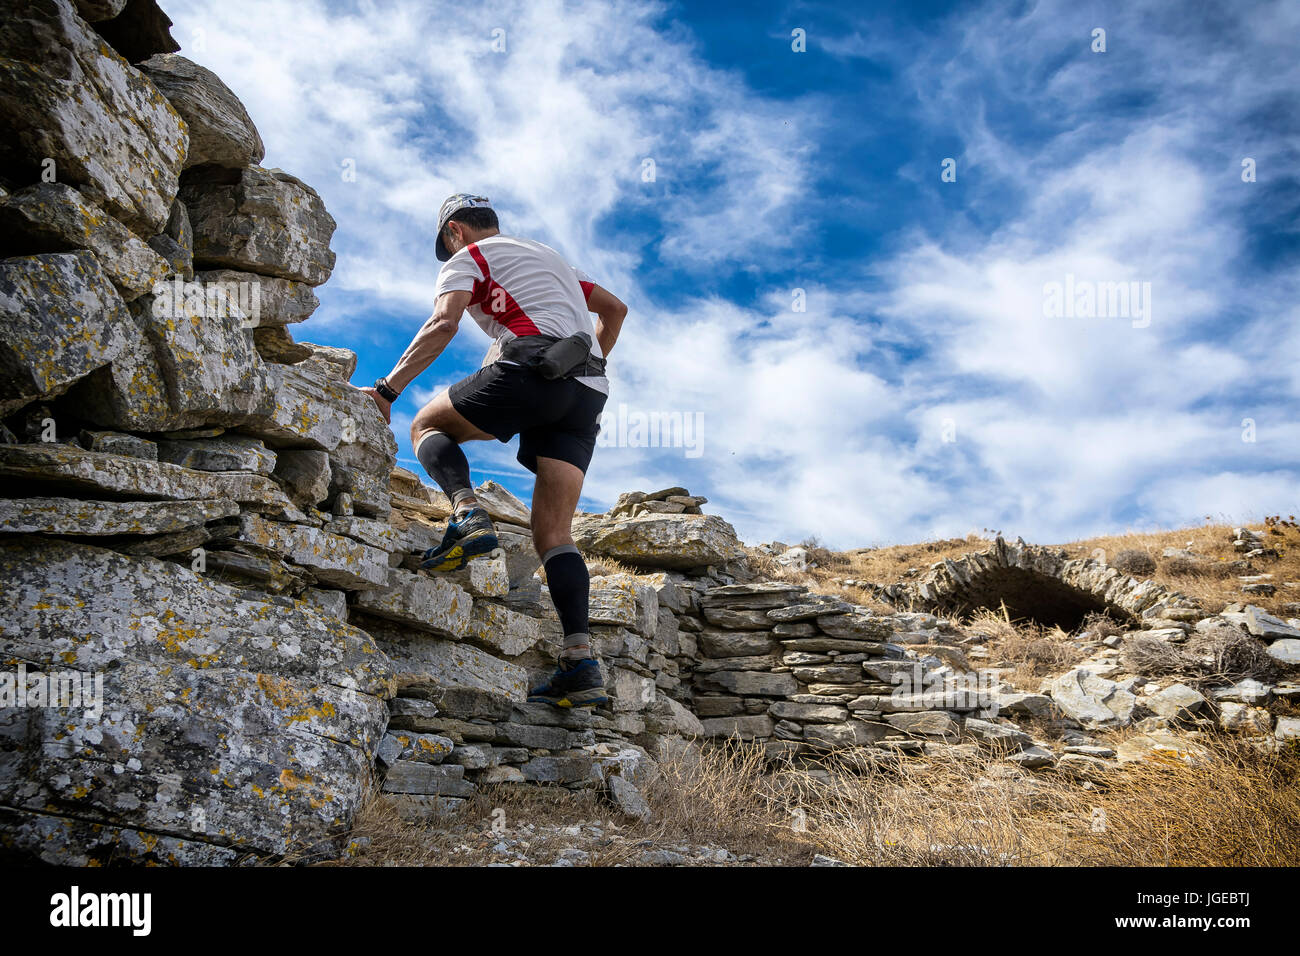 trail runner climbing a rocky hill with ancient monument Stock Photo